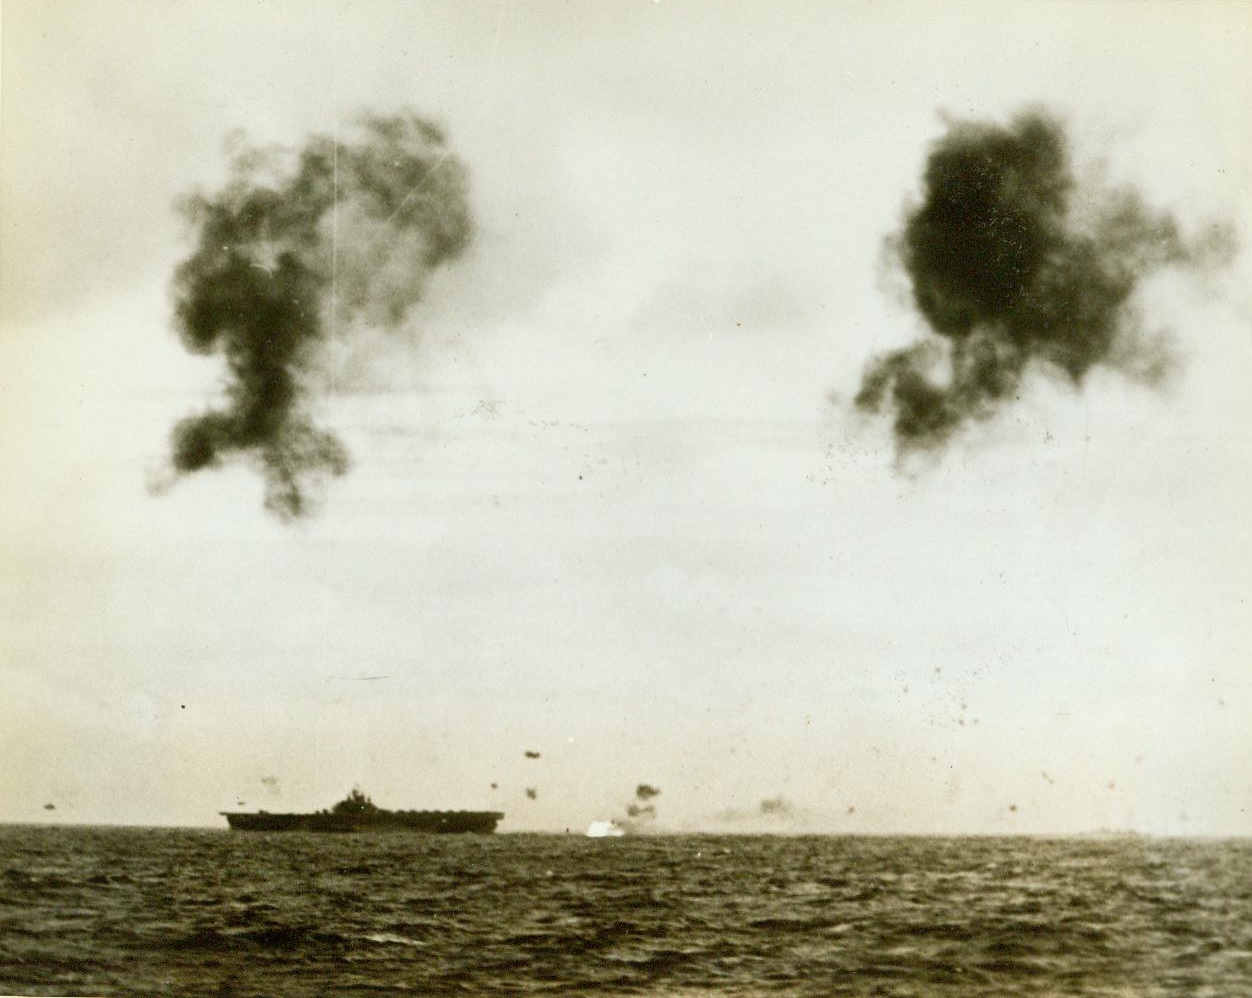 U.S. Carriers Throw Off Jap Attackers, 10/18/1944. Formosa – In a cloud of spray and flame, an enemy plane disappears just aft of an Essex class carrier. Another flier of the rising sun swoops over the carriers bow as anti-aircraft bursts pepper the sky. This is one of the first pictures of the fierce sea engagement off Formosa 10/18/44 Credit line (ACME);